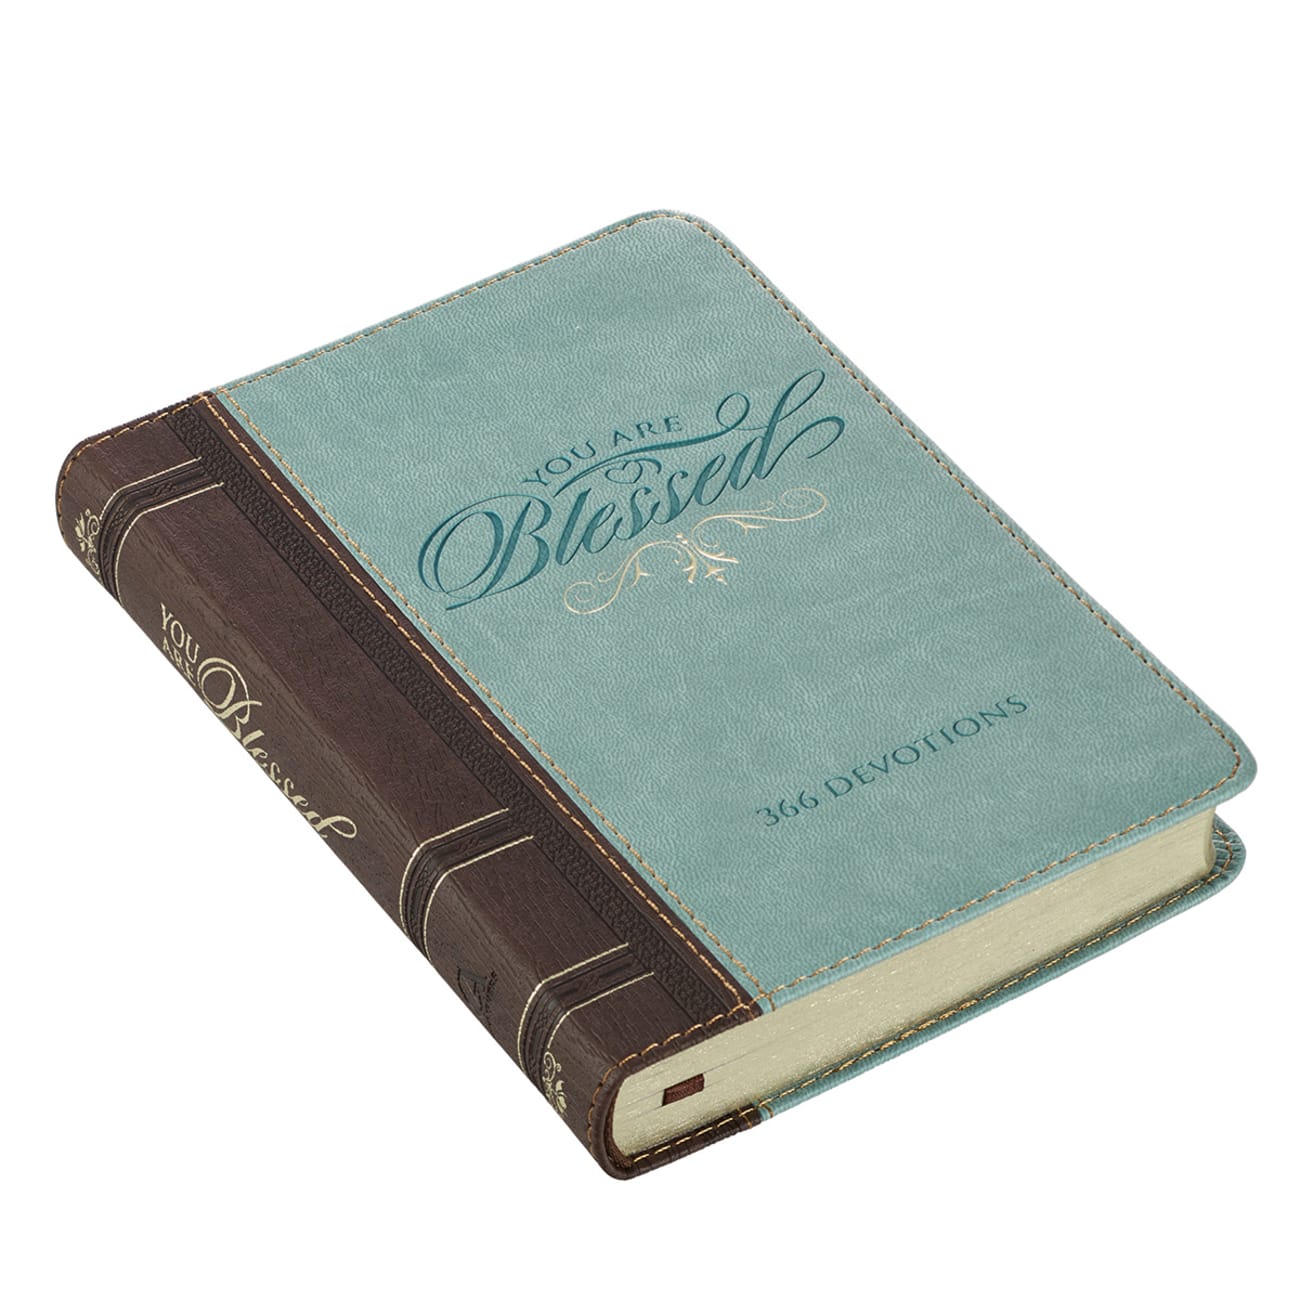 You Are Blessed (365 Daily Devotions Series) Imitation Leather